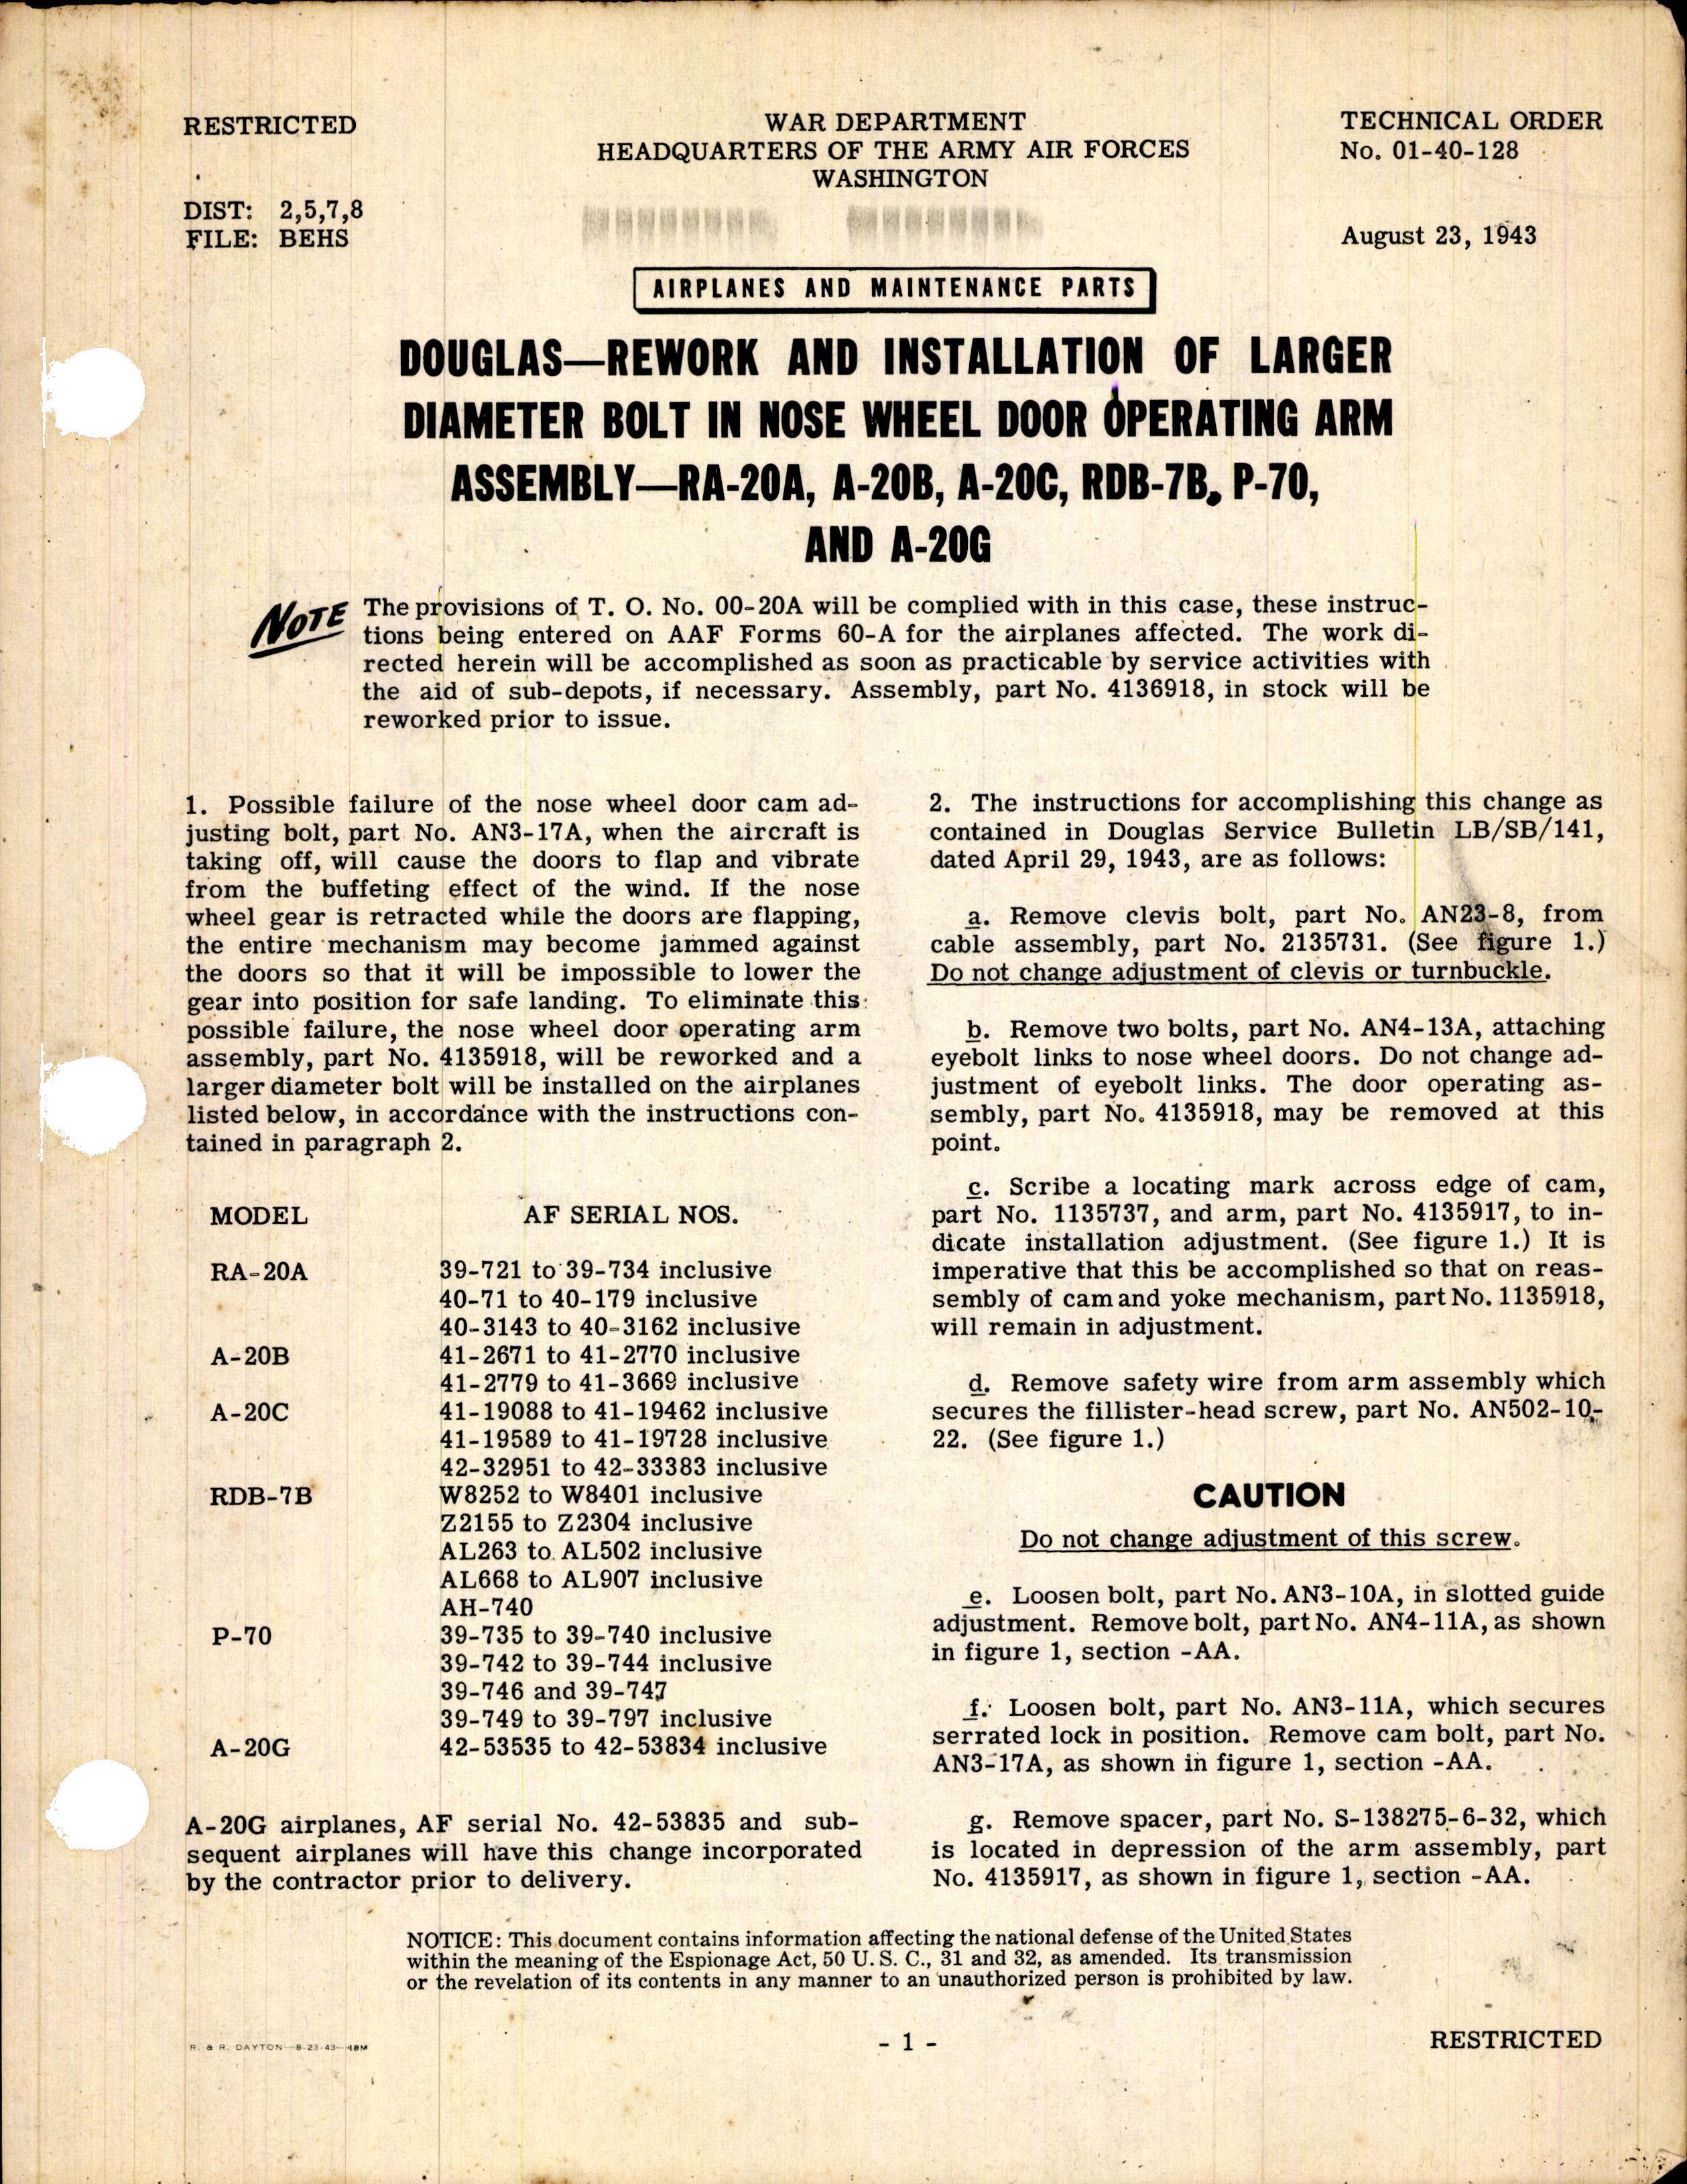 Sample page 1 from AirCorps Library document: Rework and Install of Larger Diameter Bolt in Nose Wheel Door Operating Arm Assembly